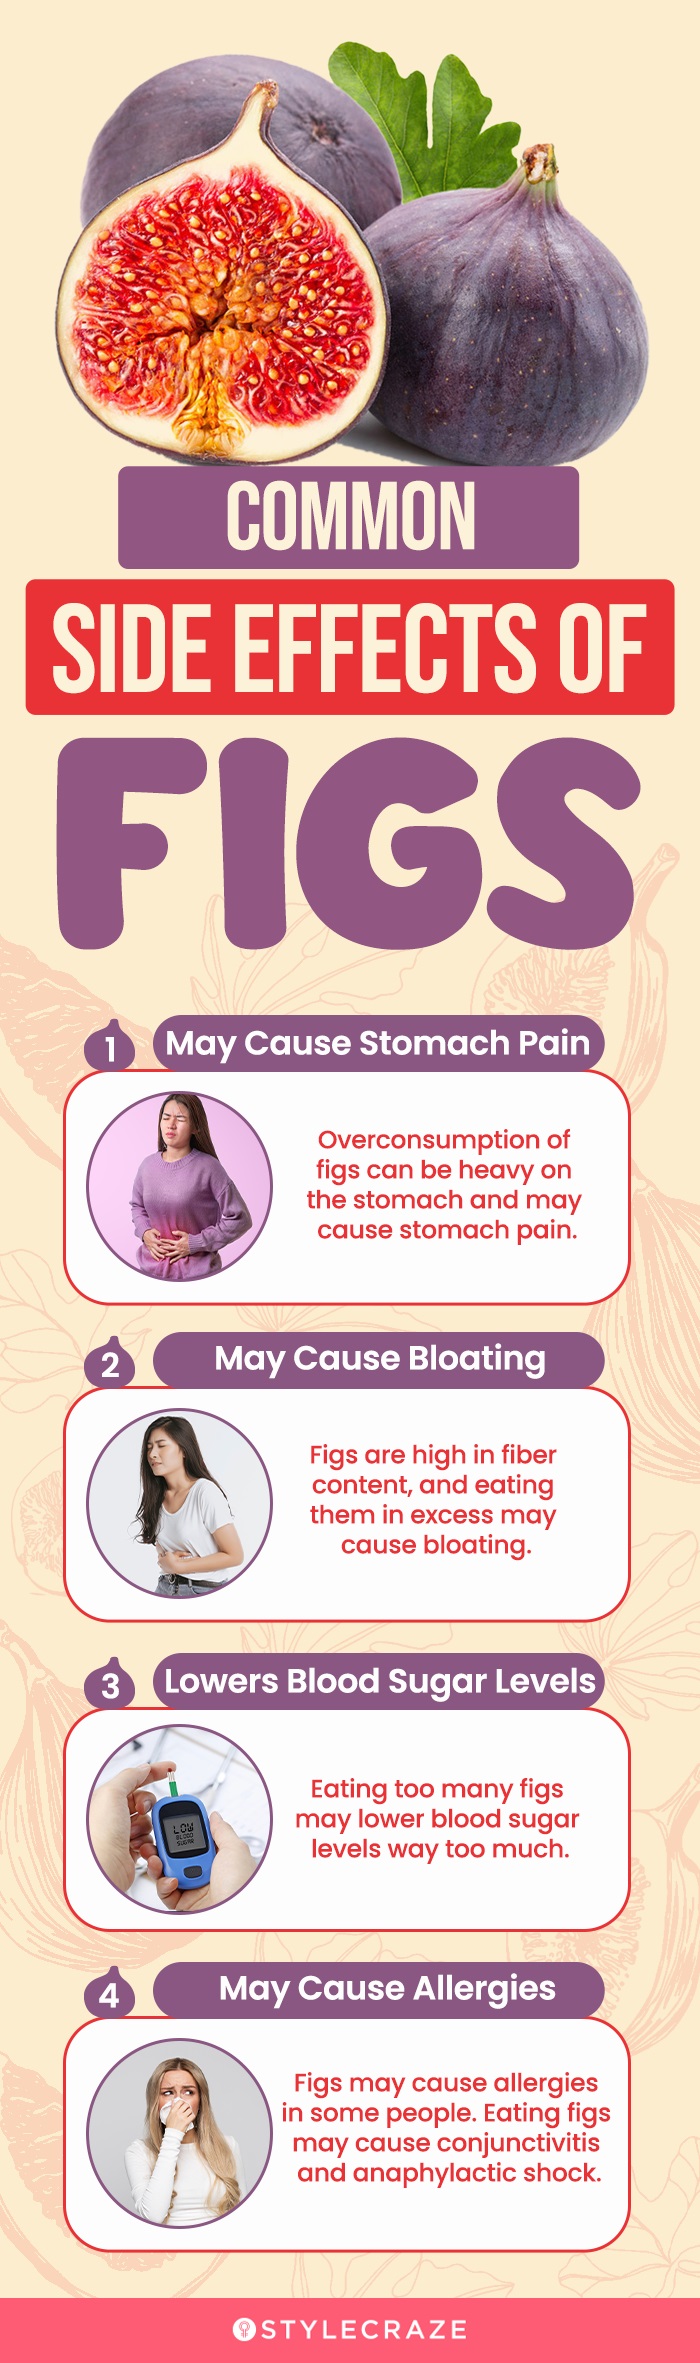 common side effects of figs (infographic)